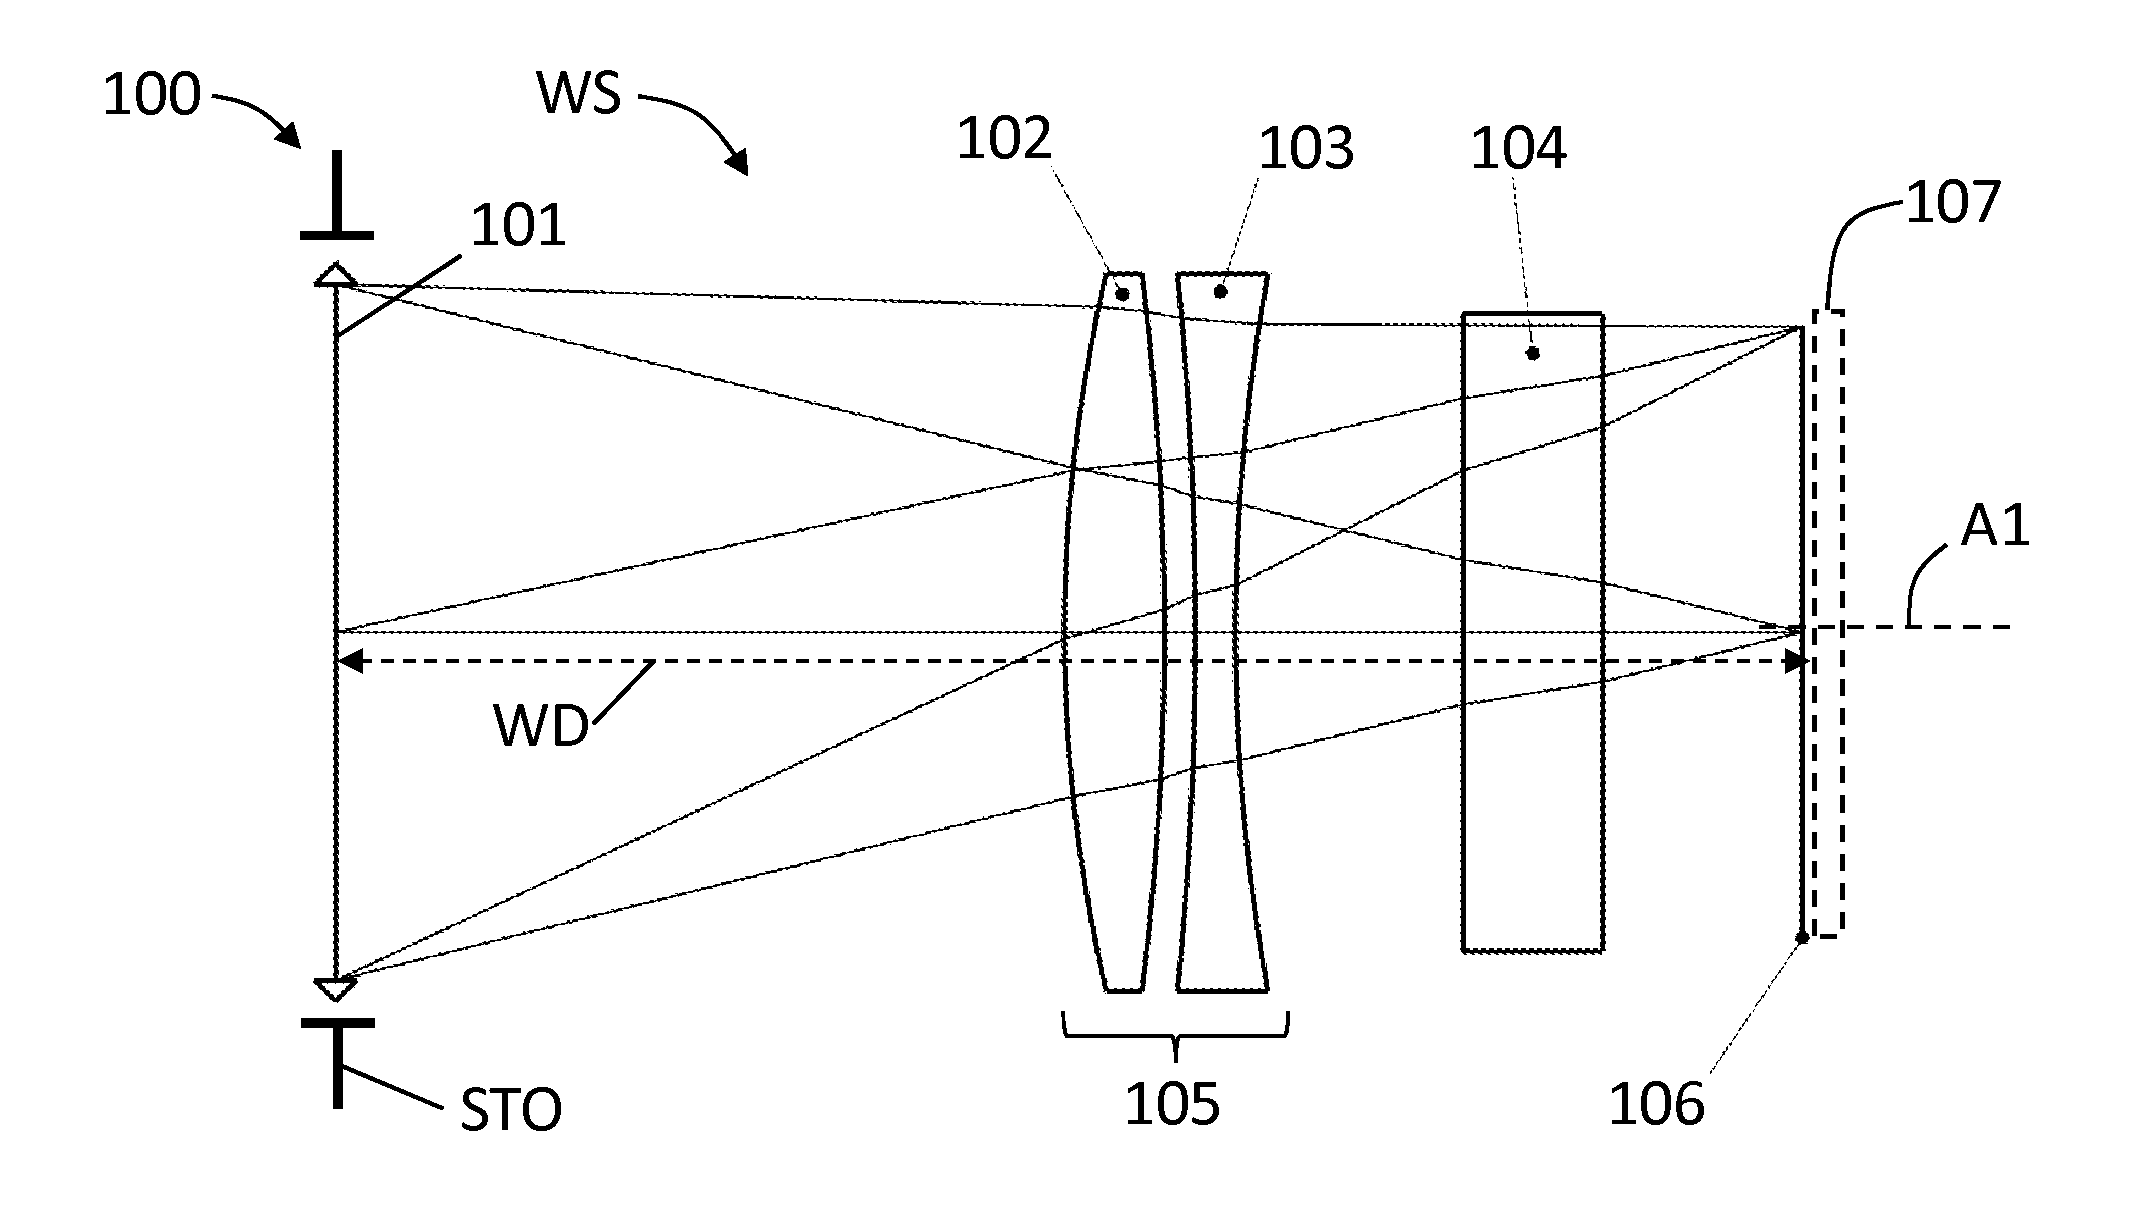 Corrective optical systems and methods